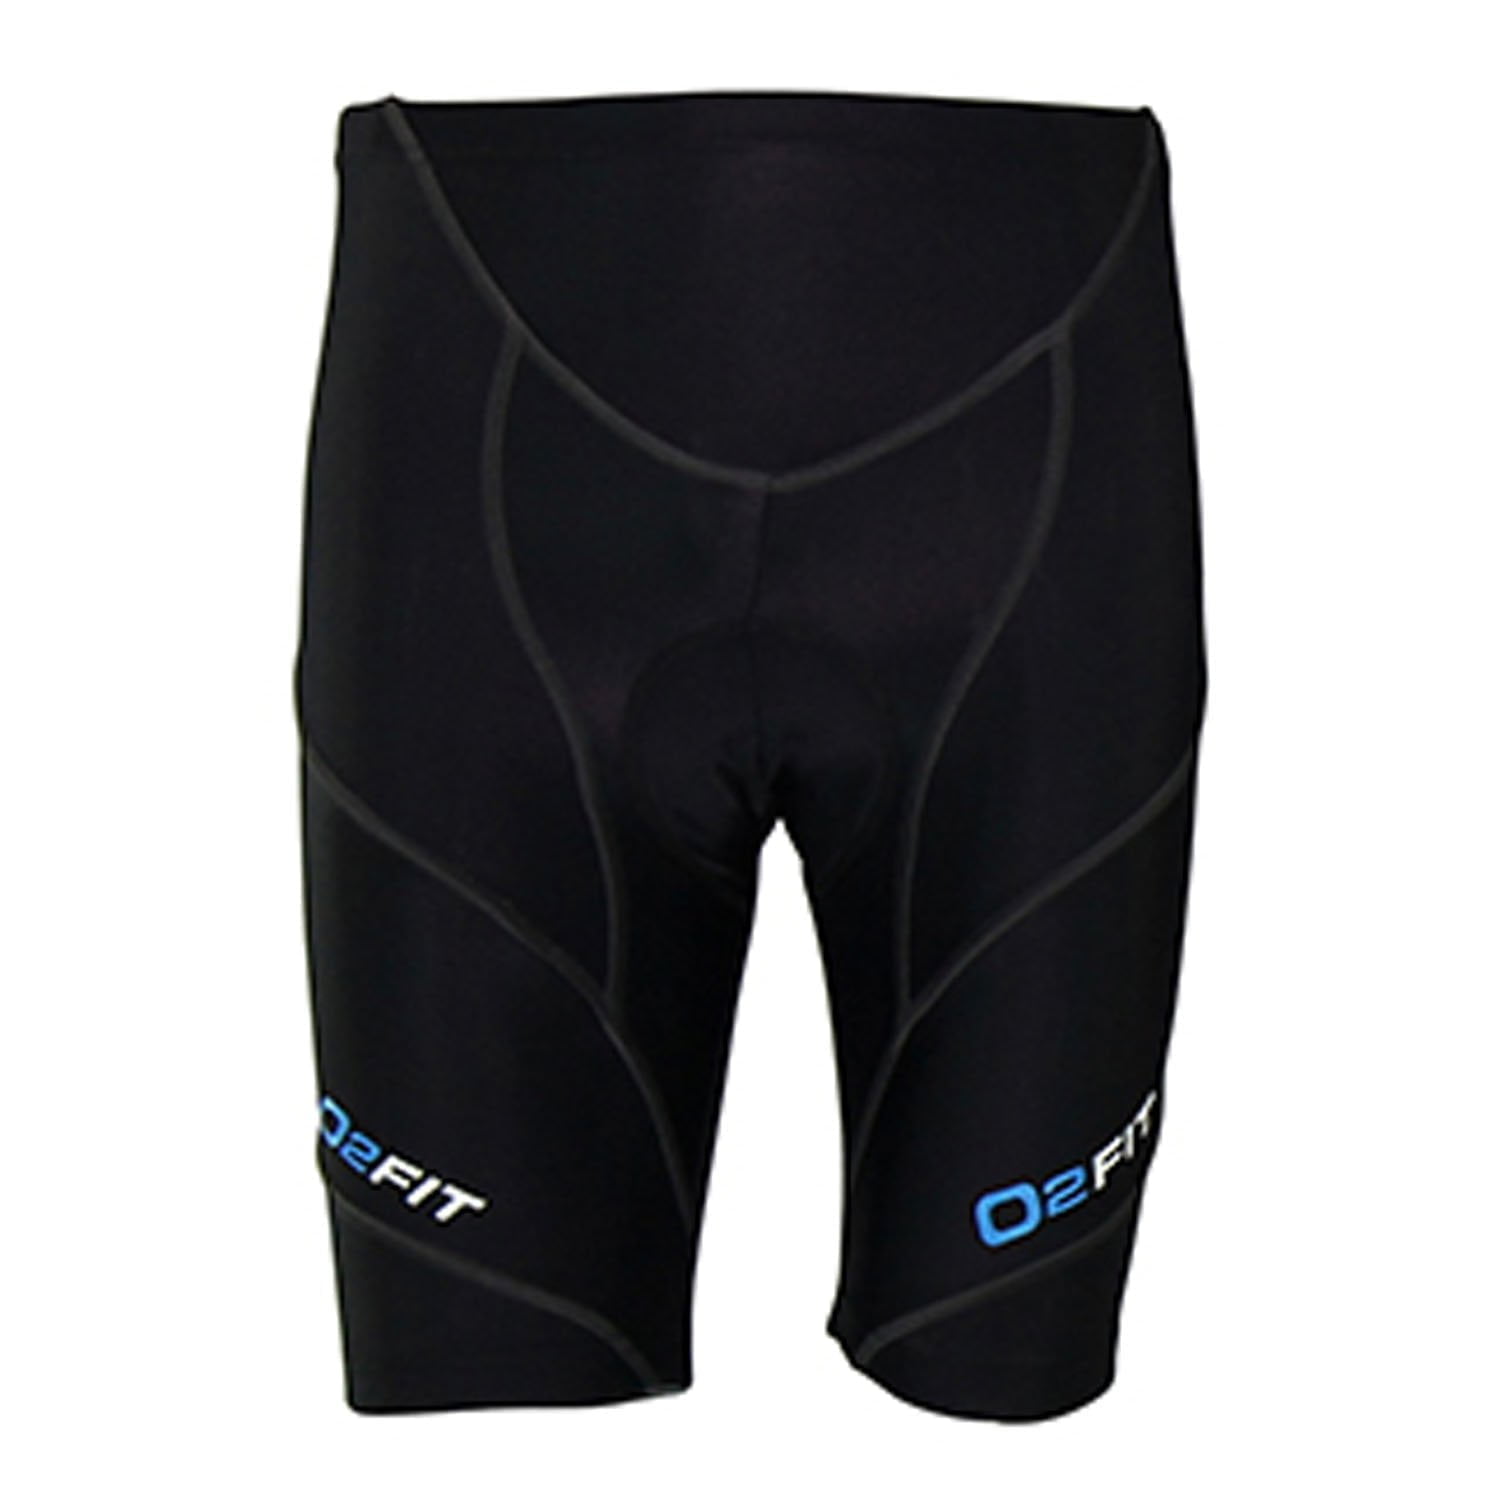 Male Cycle Shorts Regular Black with Black – O2Fit